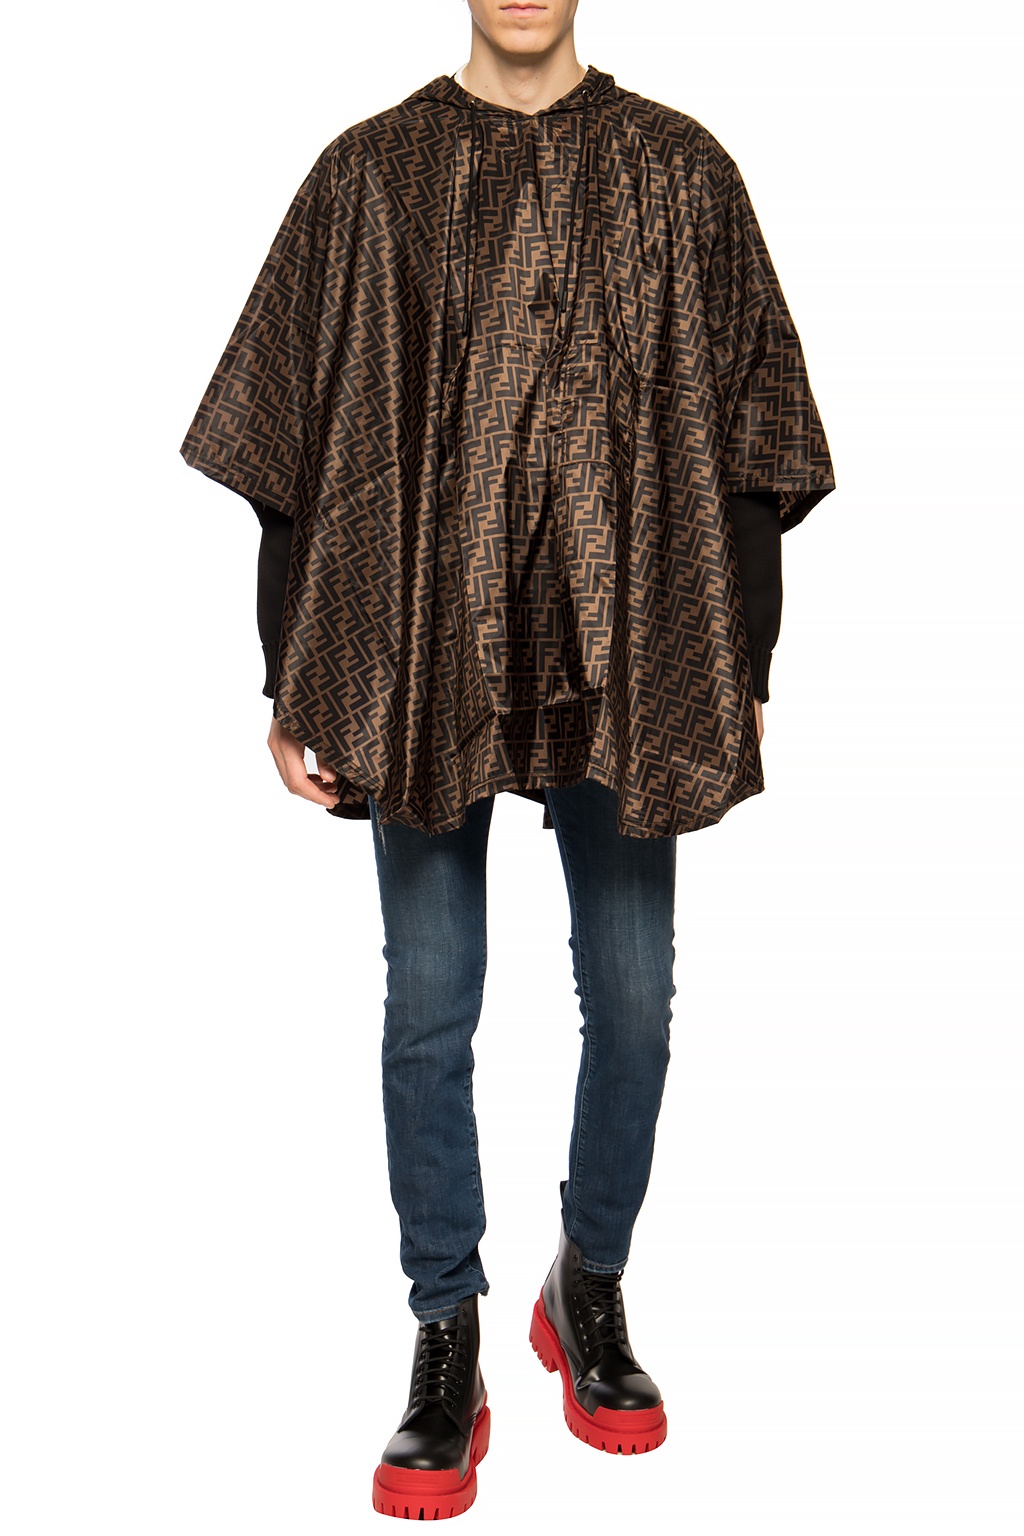 Louis Vuitton Men's Poncho and Carry All